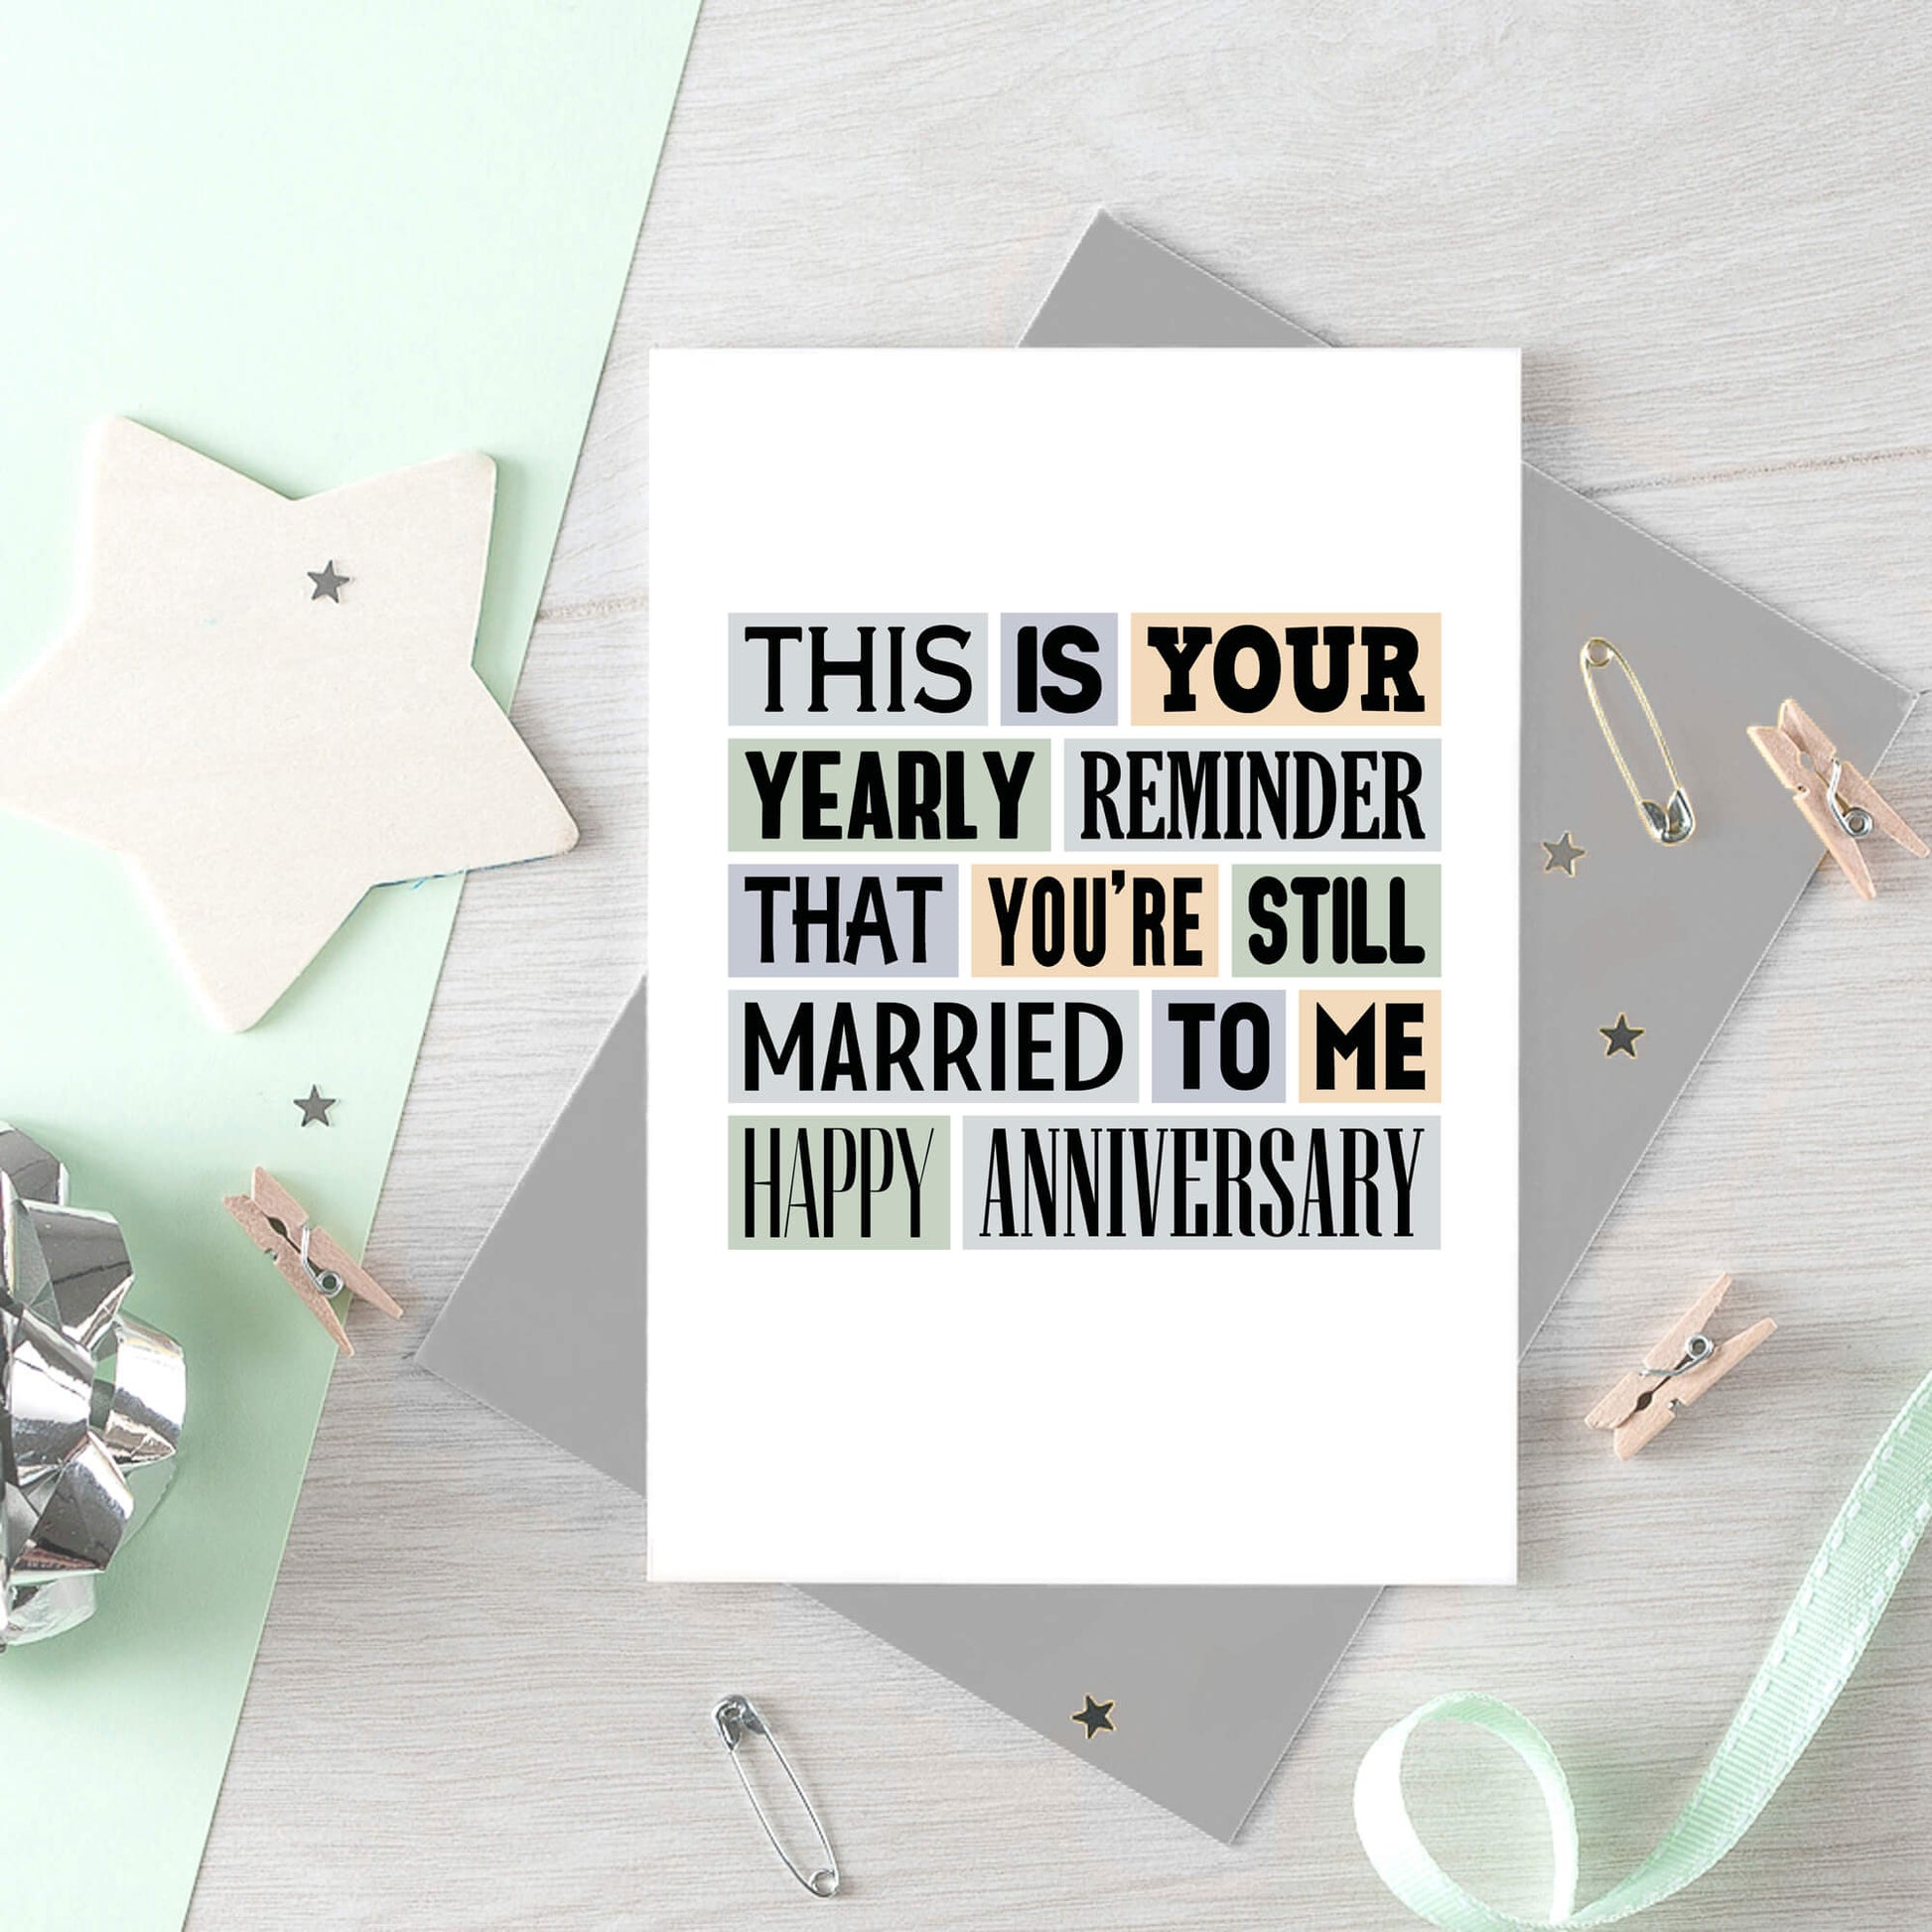 Funny Anniversary Card by SixElevenCreations. Reads This is your yearly reminder that you're still married to me. Happy anniversary. Product Code SE0117A6